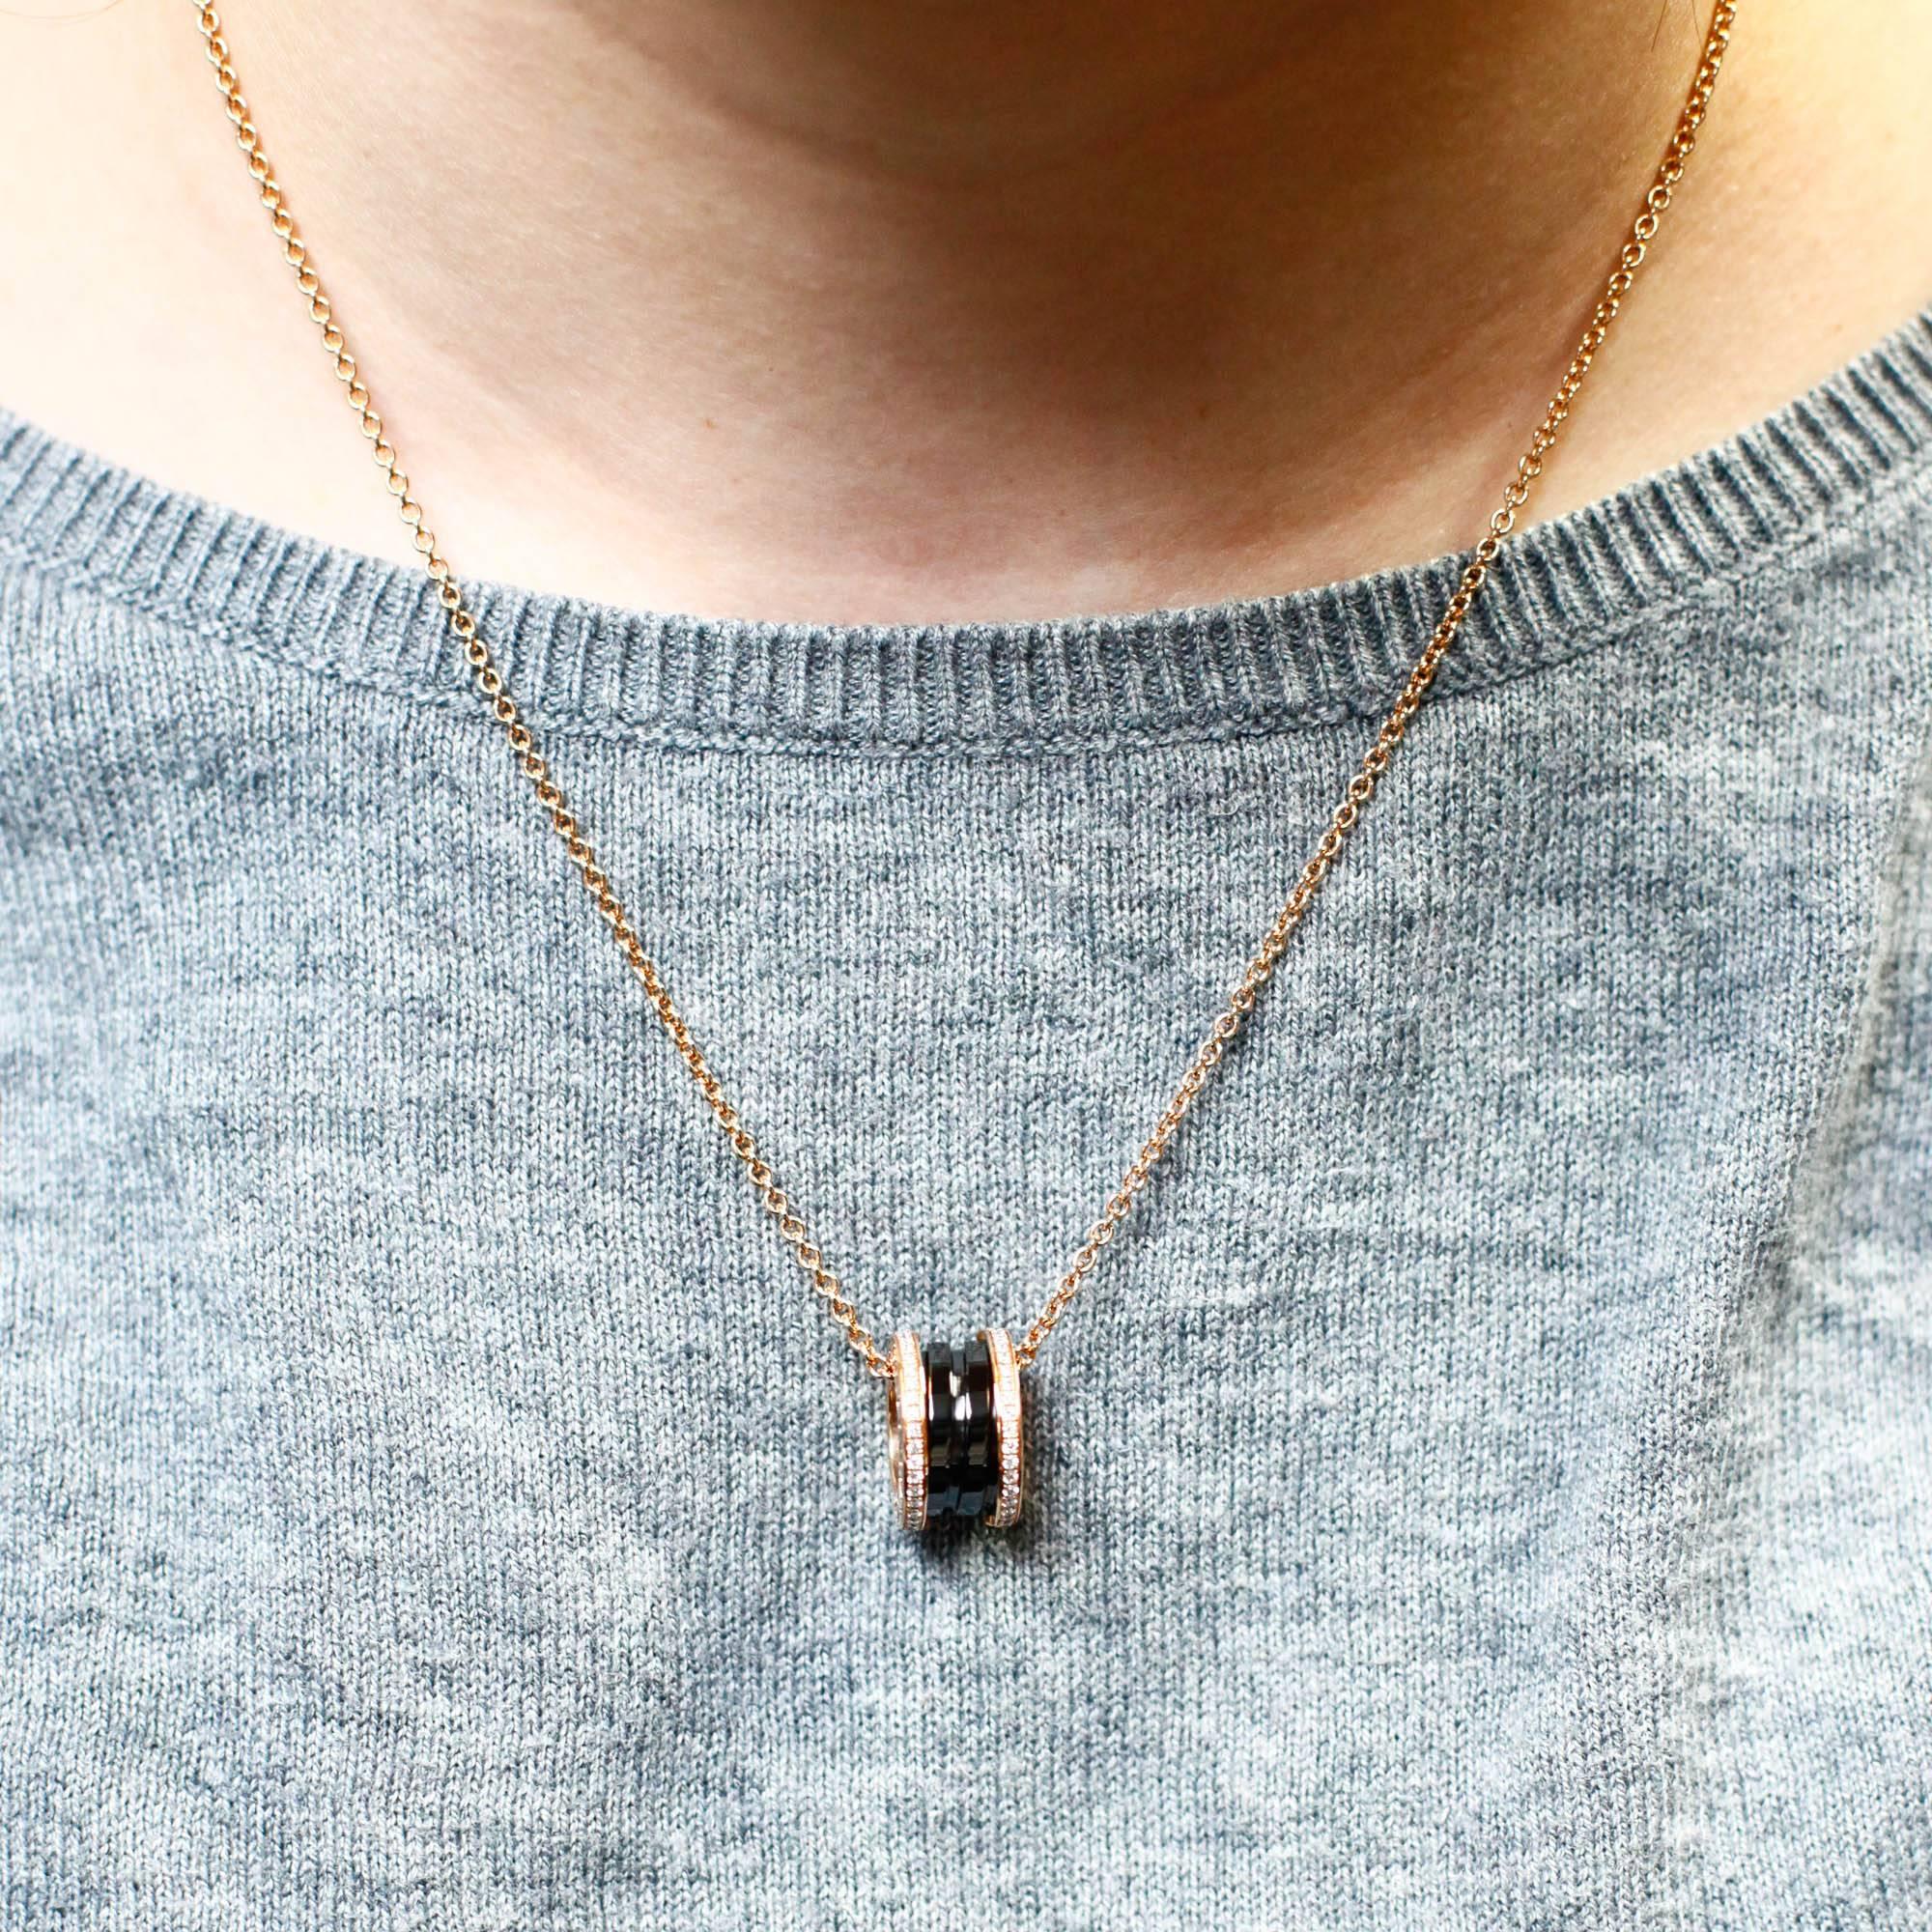 Inspired by the Colosseum in Rome, this 18k rose gold, black ceramic and 0.41 ct. pavé diamond Bulgari B.zero1 necklace represents both the eternal city and modern Italian design. The chain can be adjusted to three different lengths. This necklace